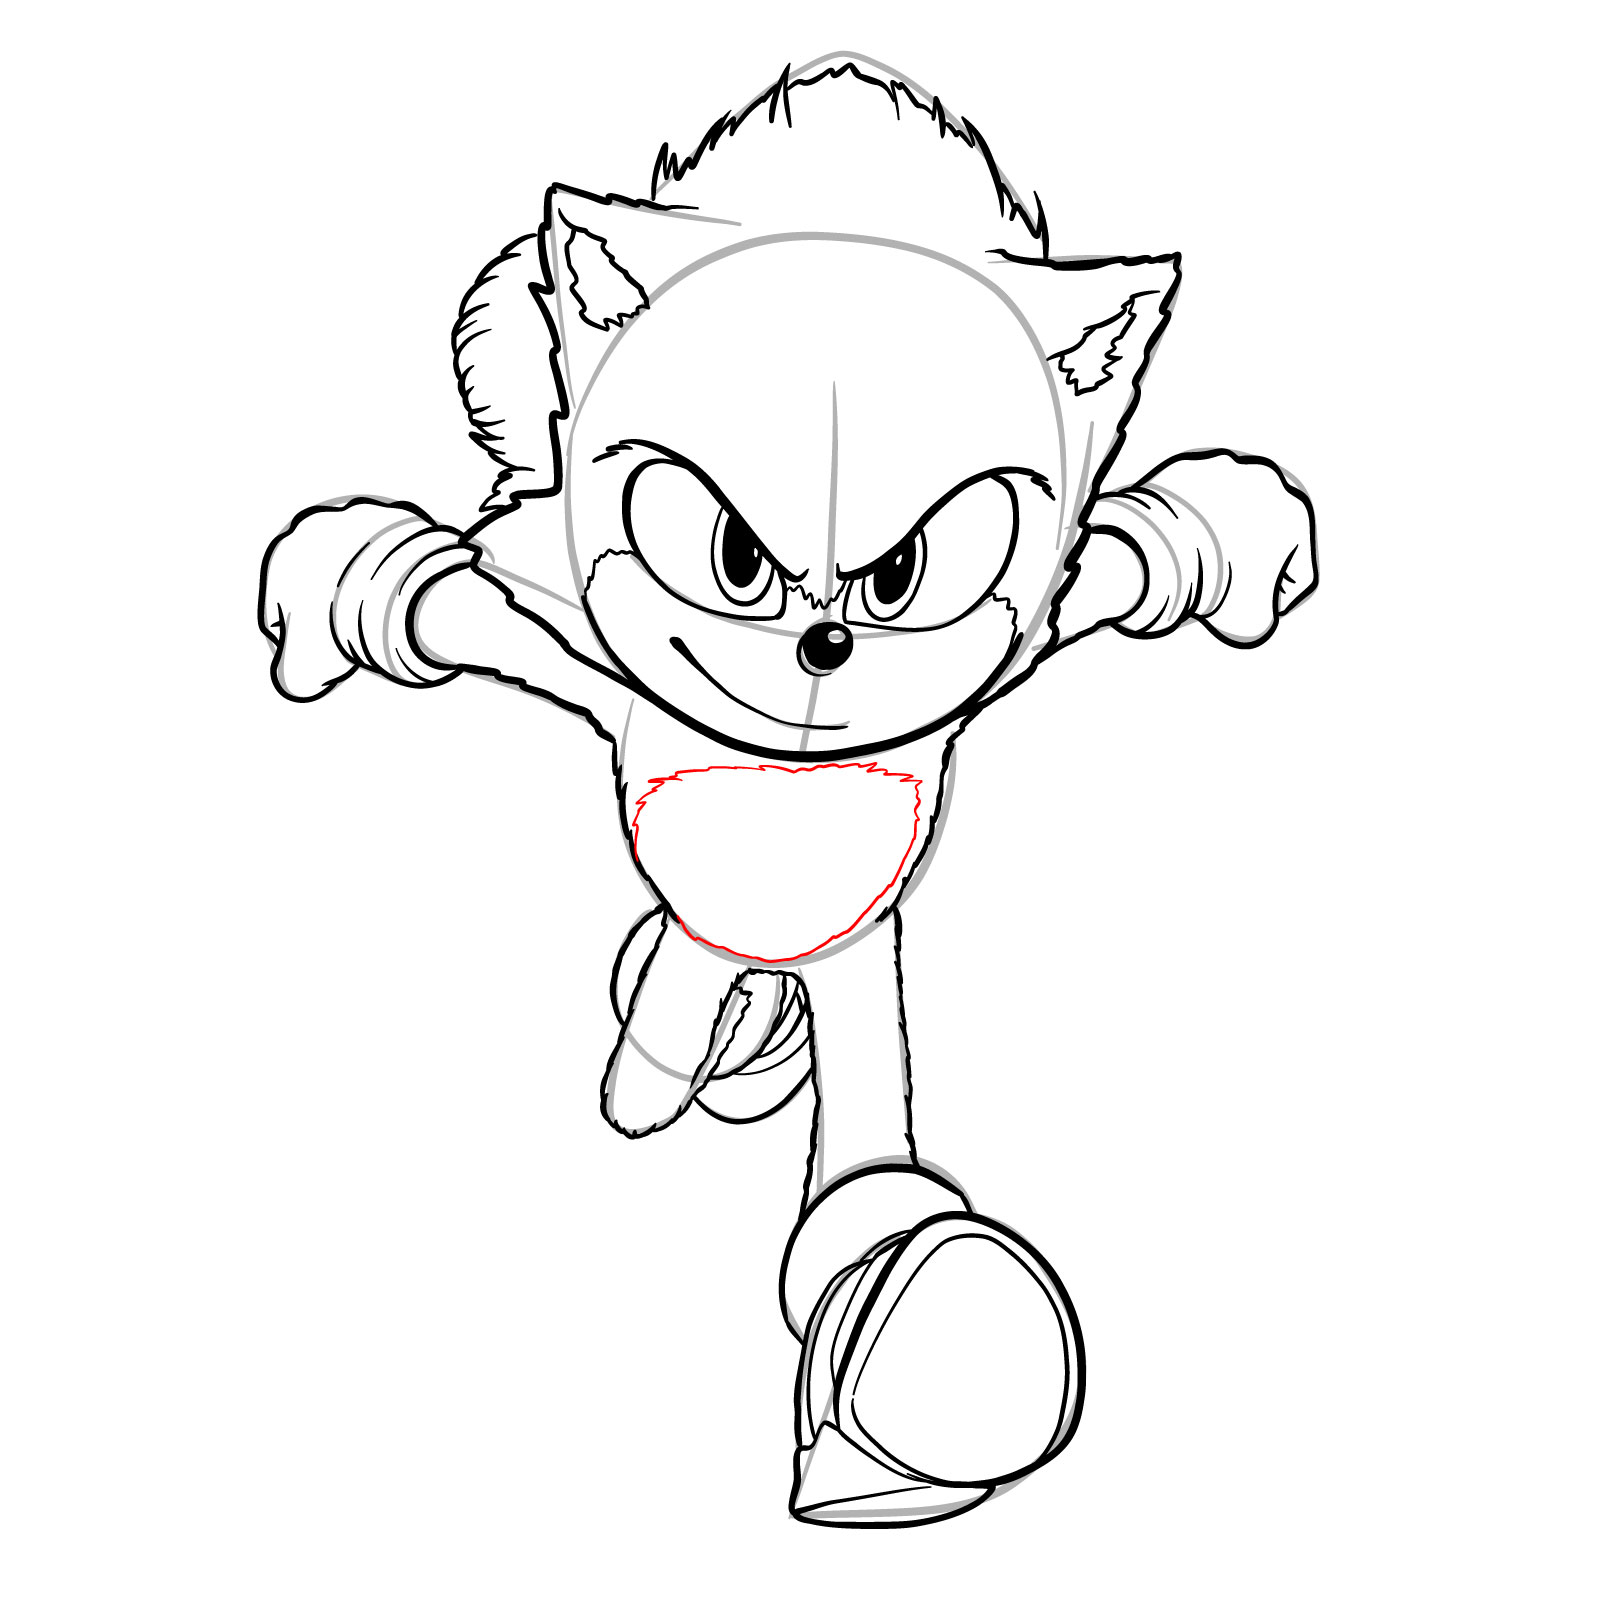 How to draw Sonic from the movie - step 29